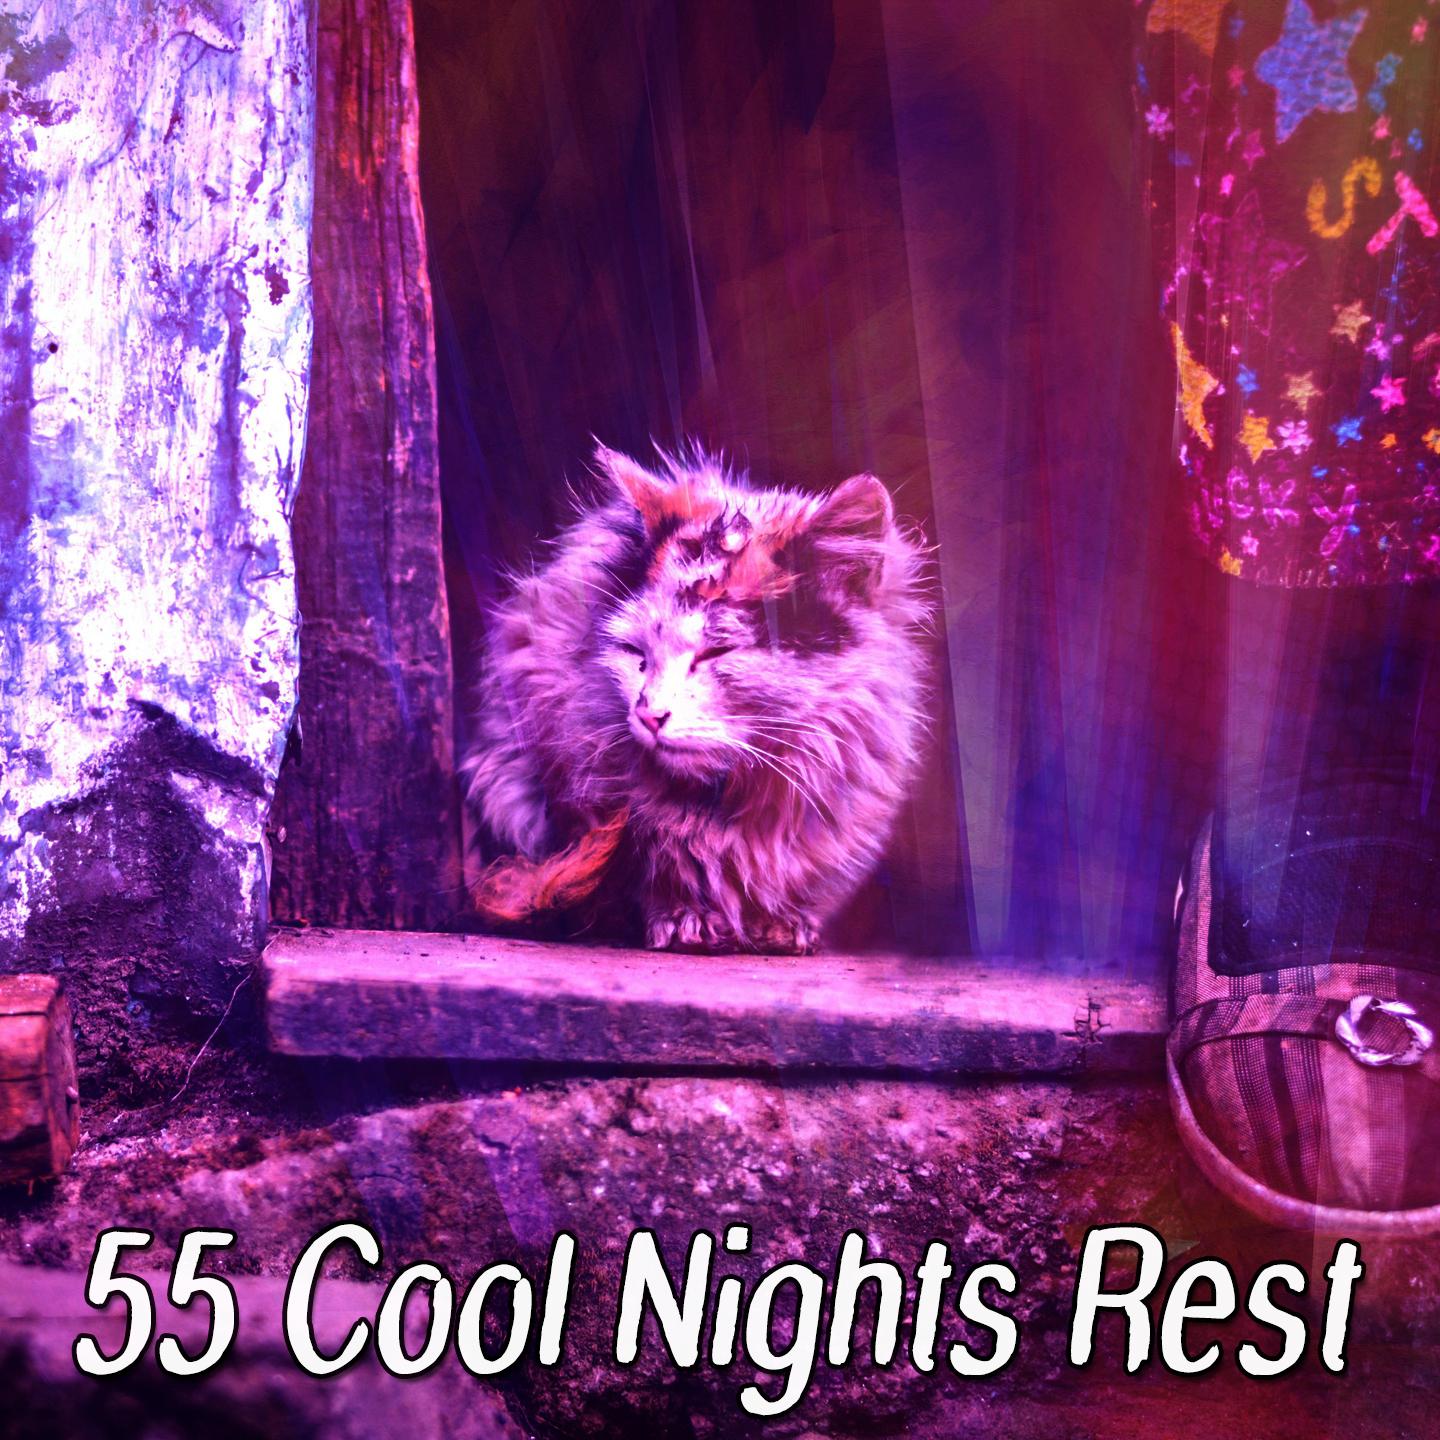 55 Cool Nights Rest